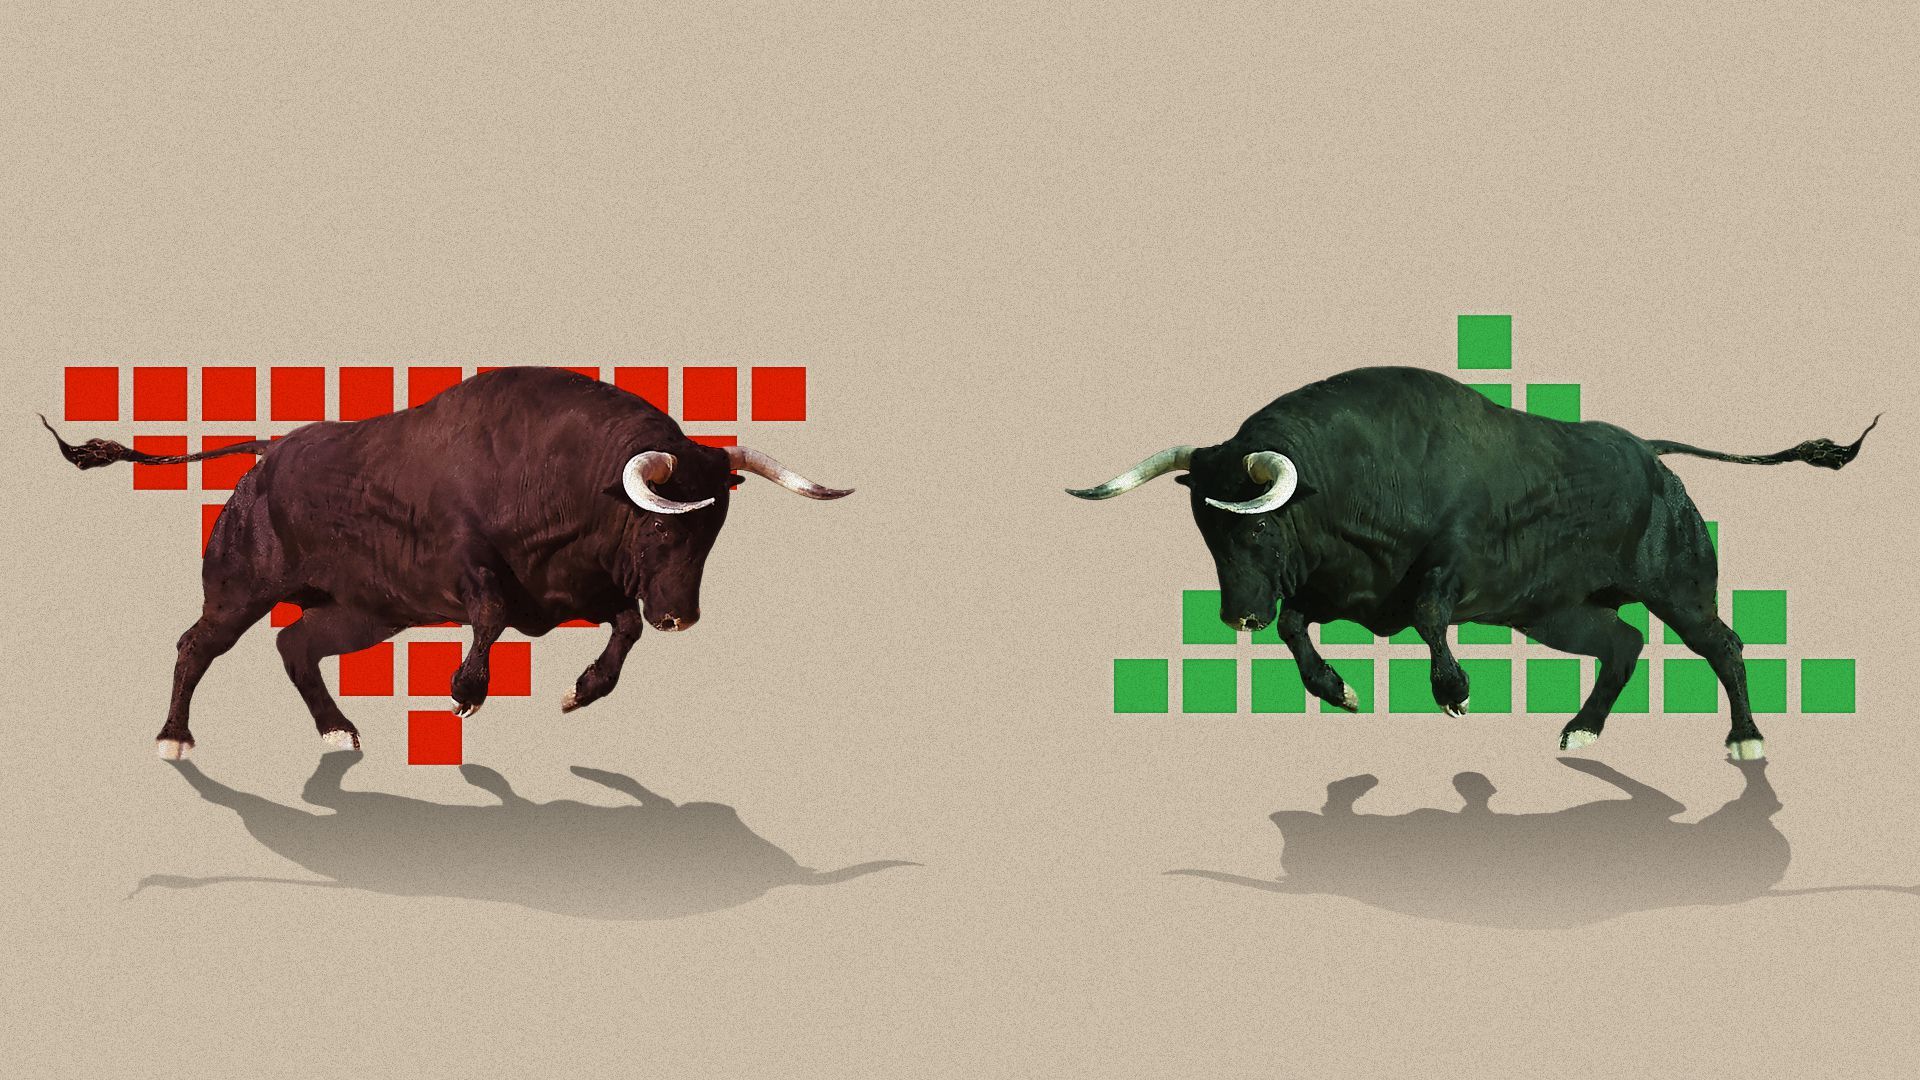 Illustration of two bulls charging each other with one in front of a stock market downward arrow and the other in front of an upward arrow.